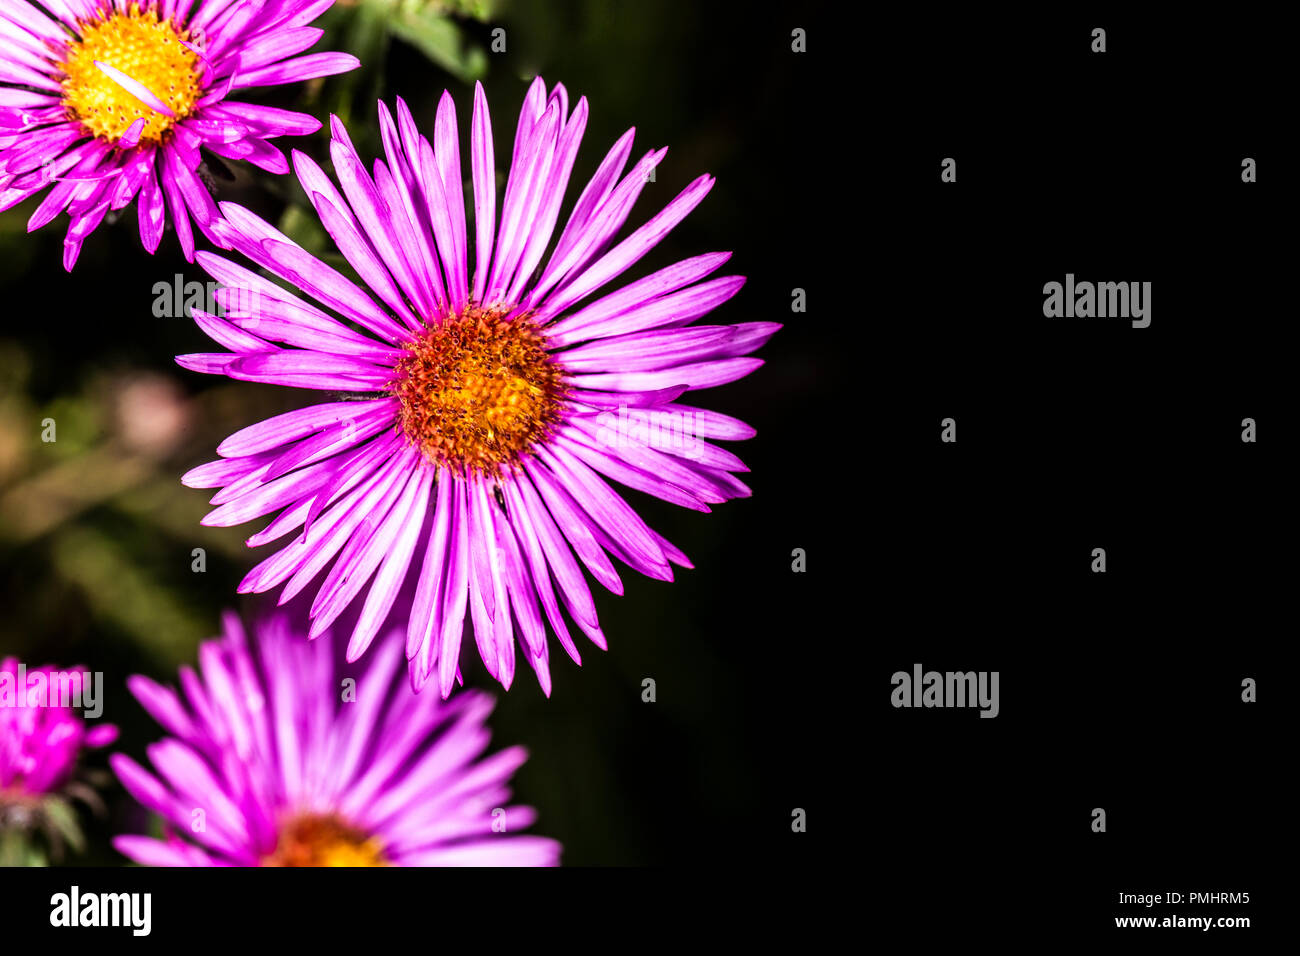 flowers Pyrethrum on a dark background with space for text Stock Photo